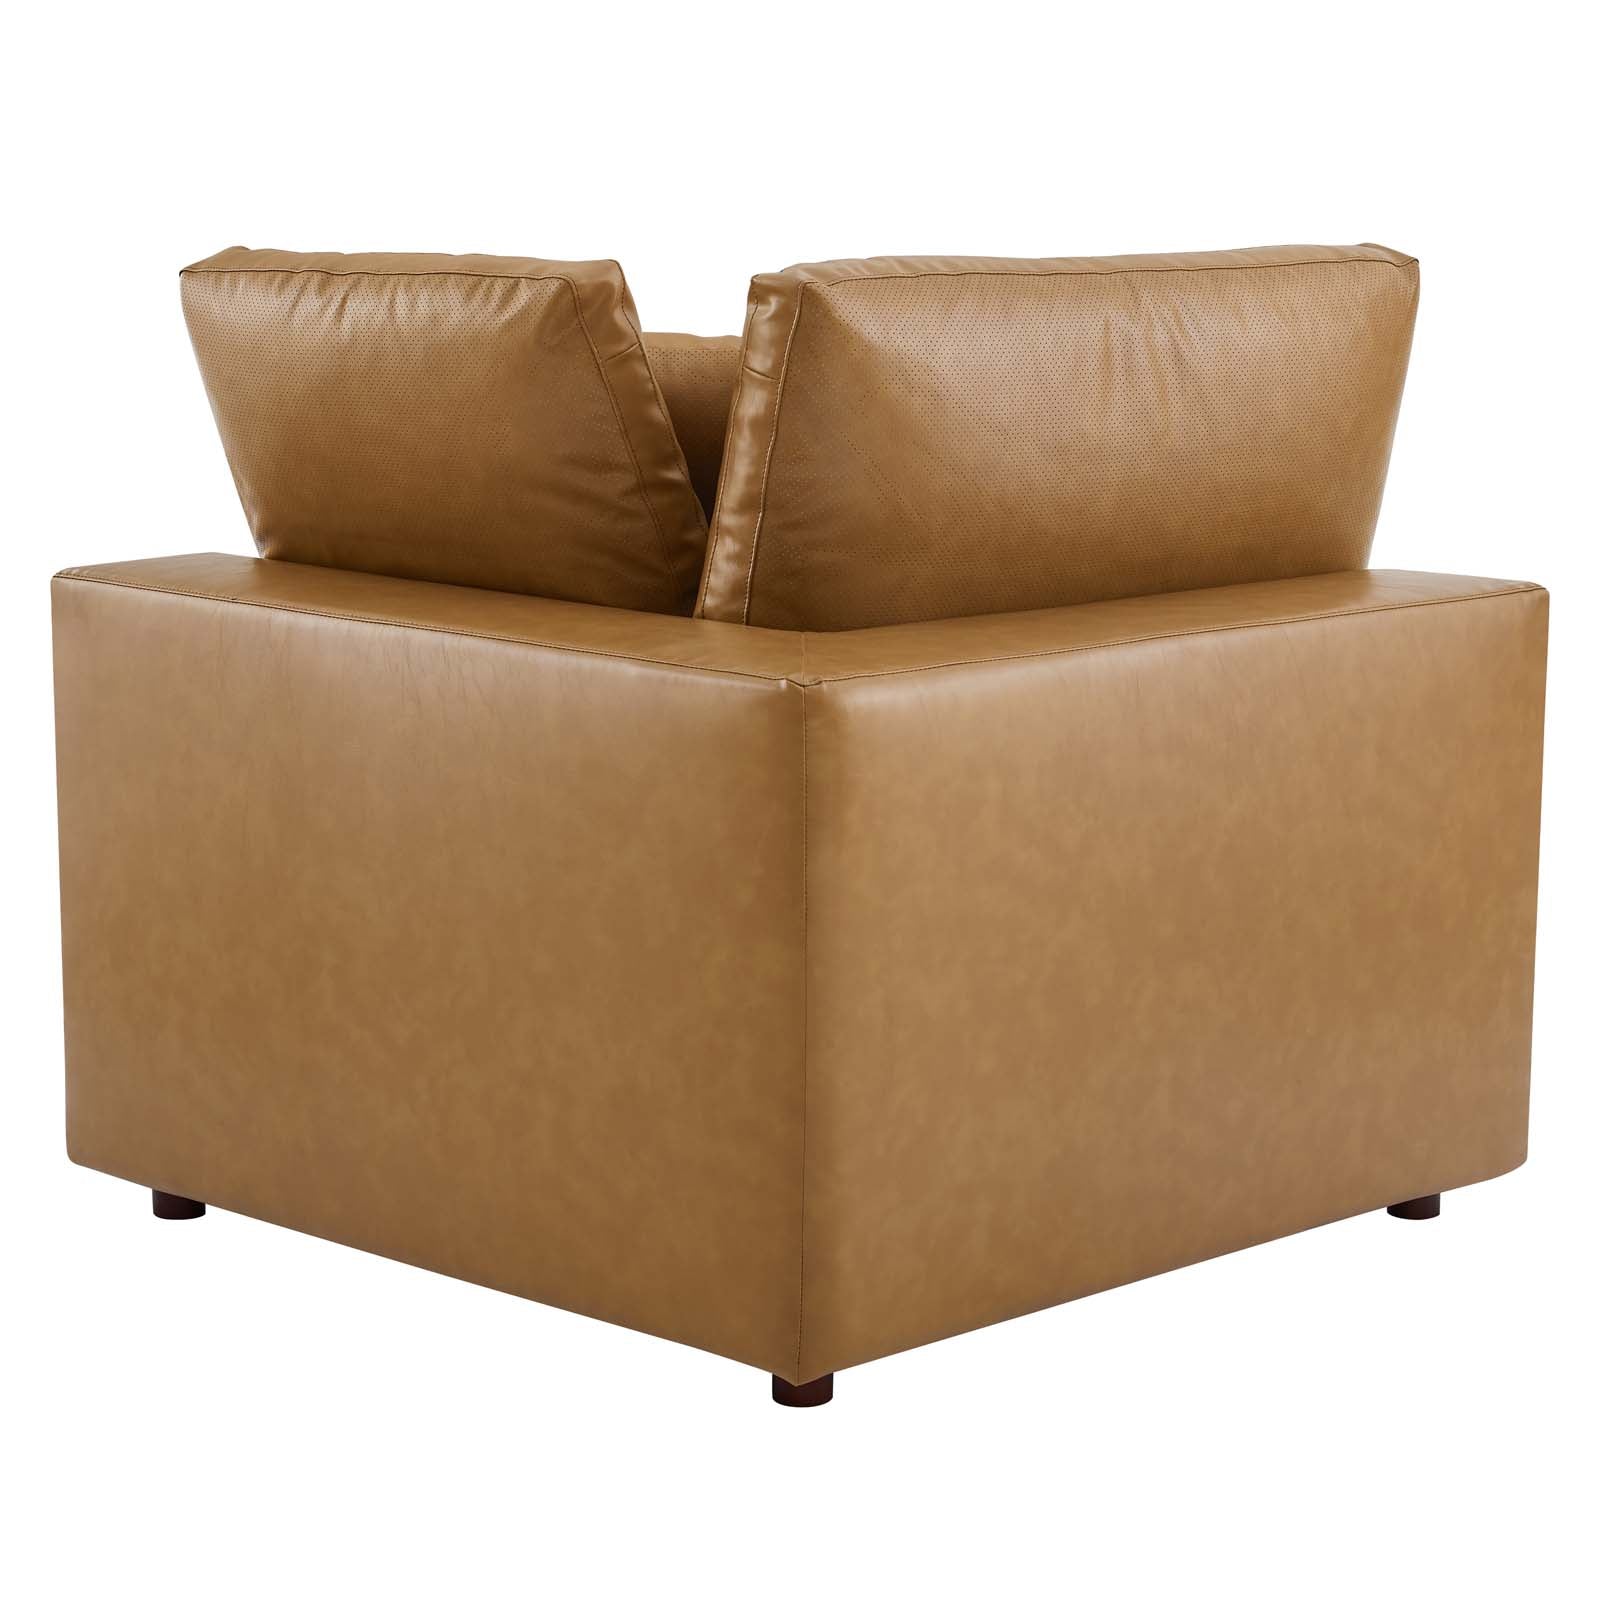 Modway Accent Chairs - Commix Down Filled Overstuffed Vegan Leather Corner Chair Tan